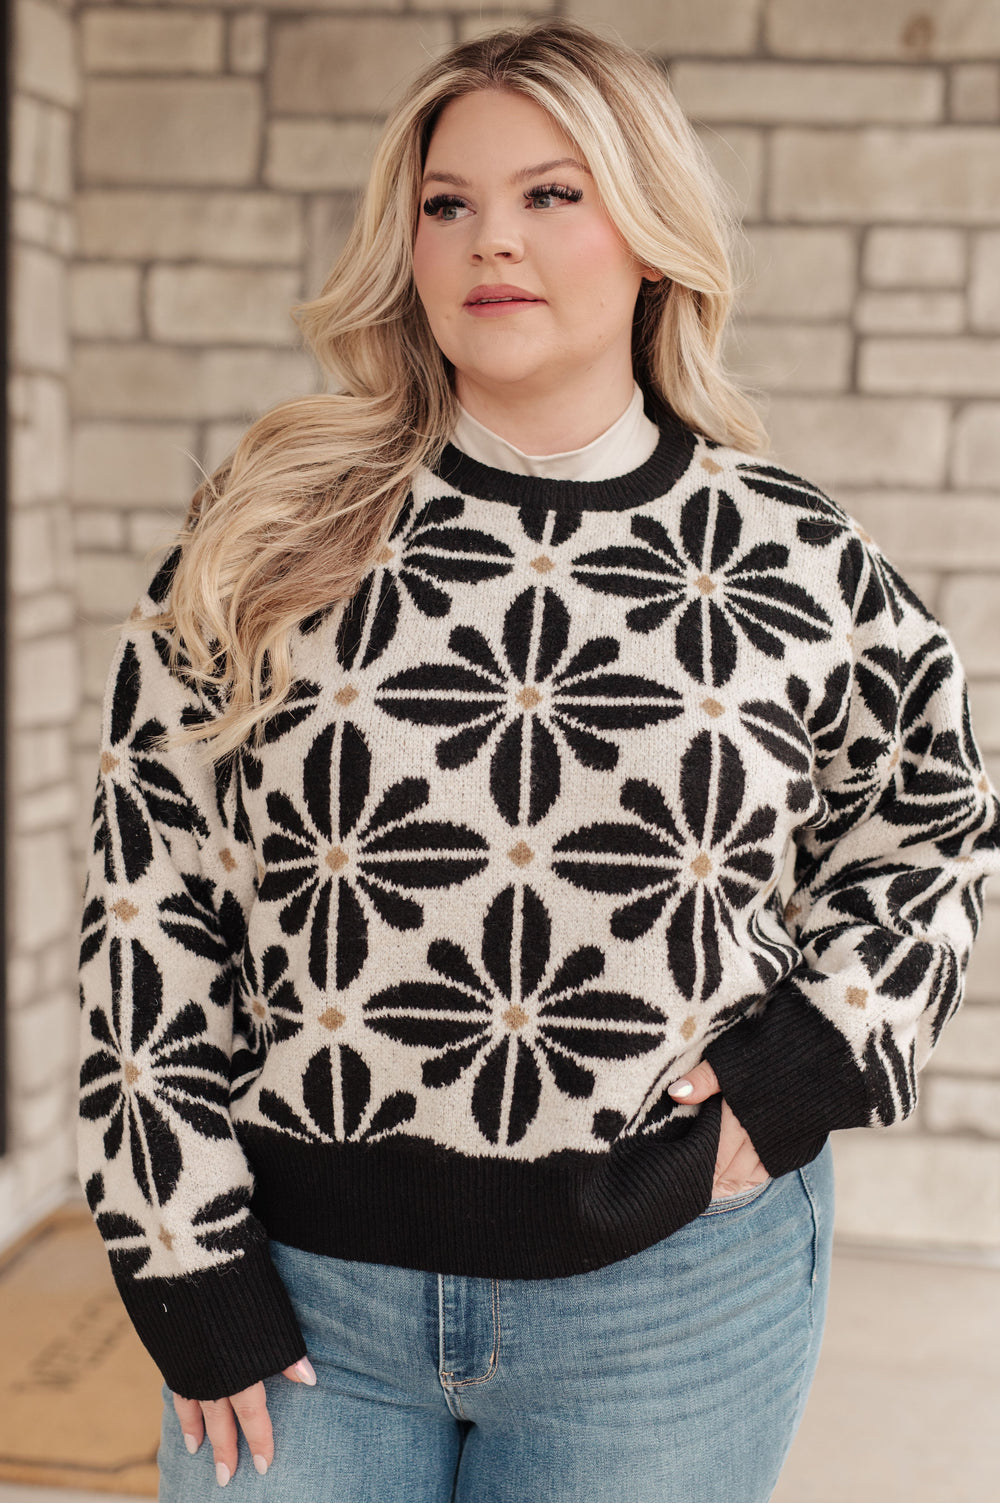 Mid Mod Floral Sweater-Sweaters/Sweatshirts-Inspired by Justeen-Women's Clothing Boutique in Chicago, Illinois